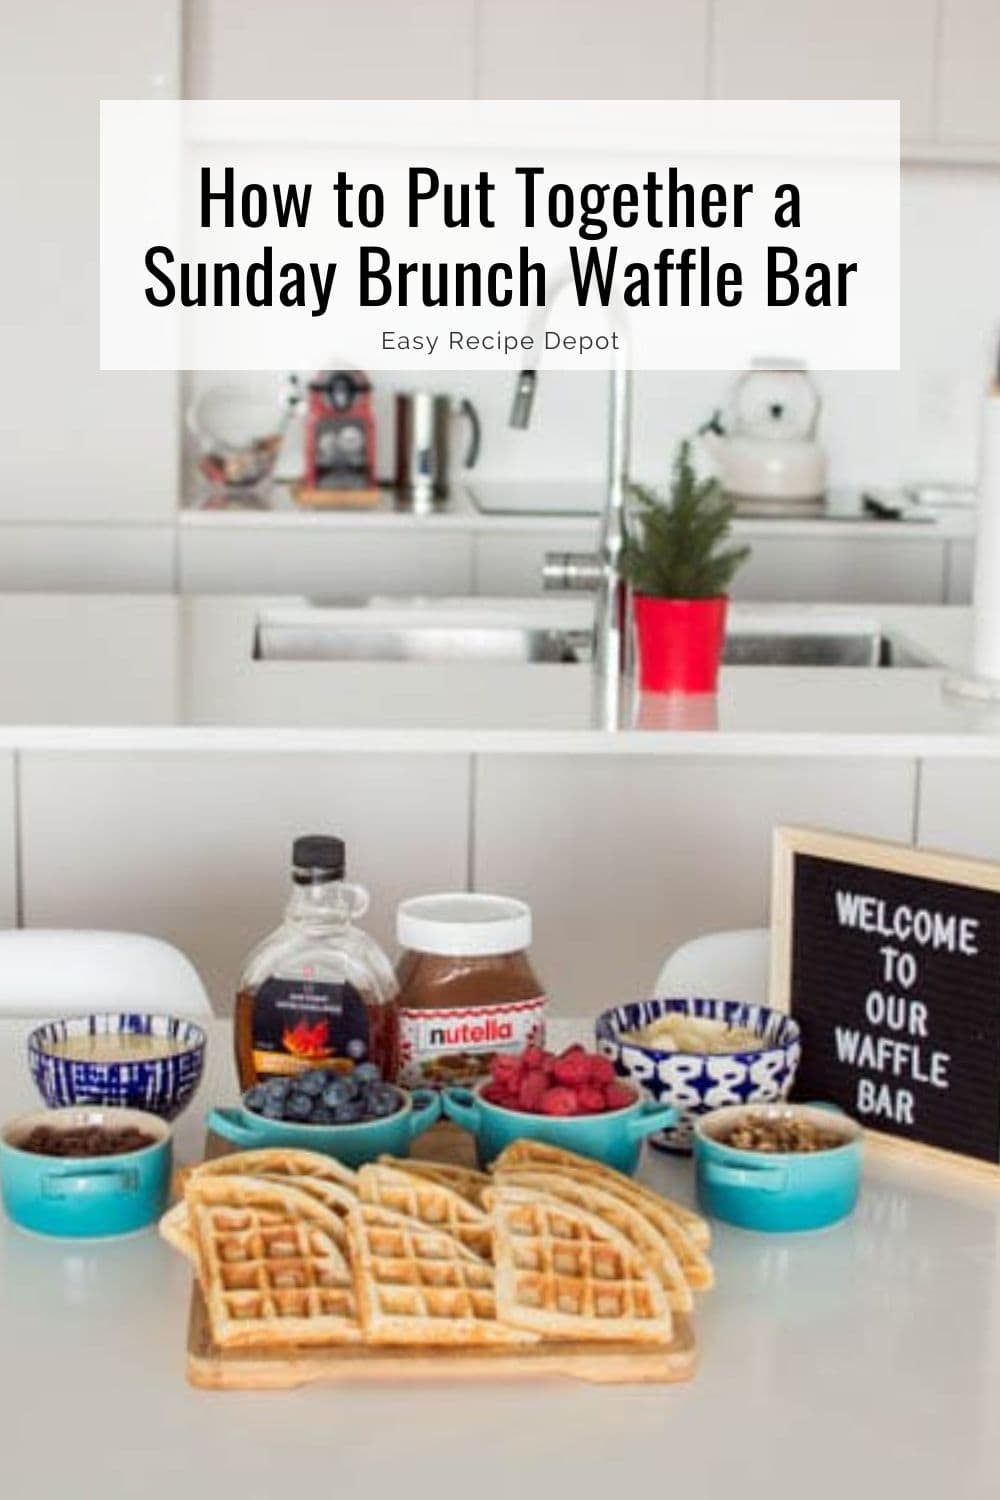 How to put together a Sunday brunch waffle bar.